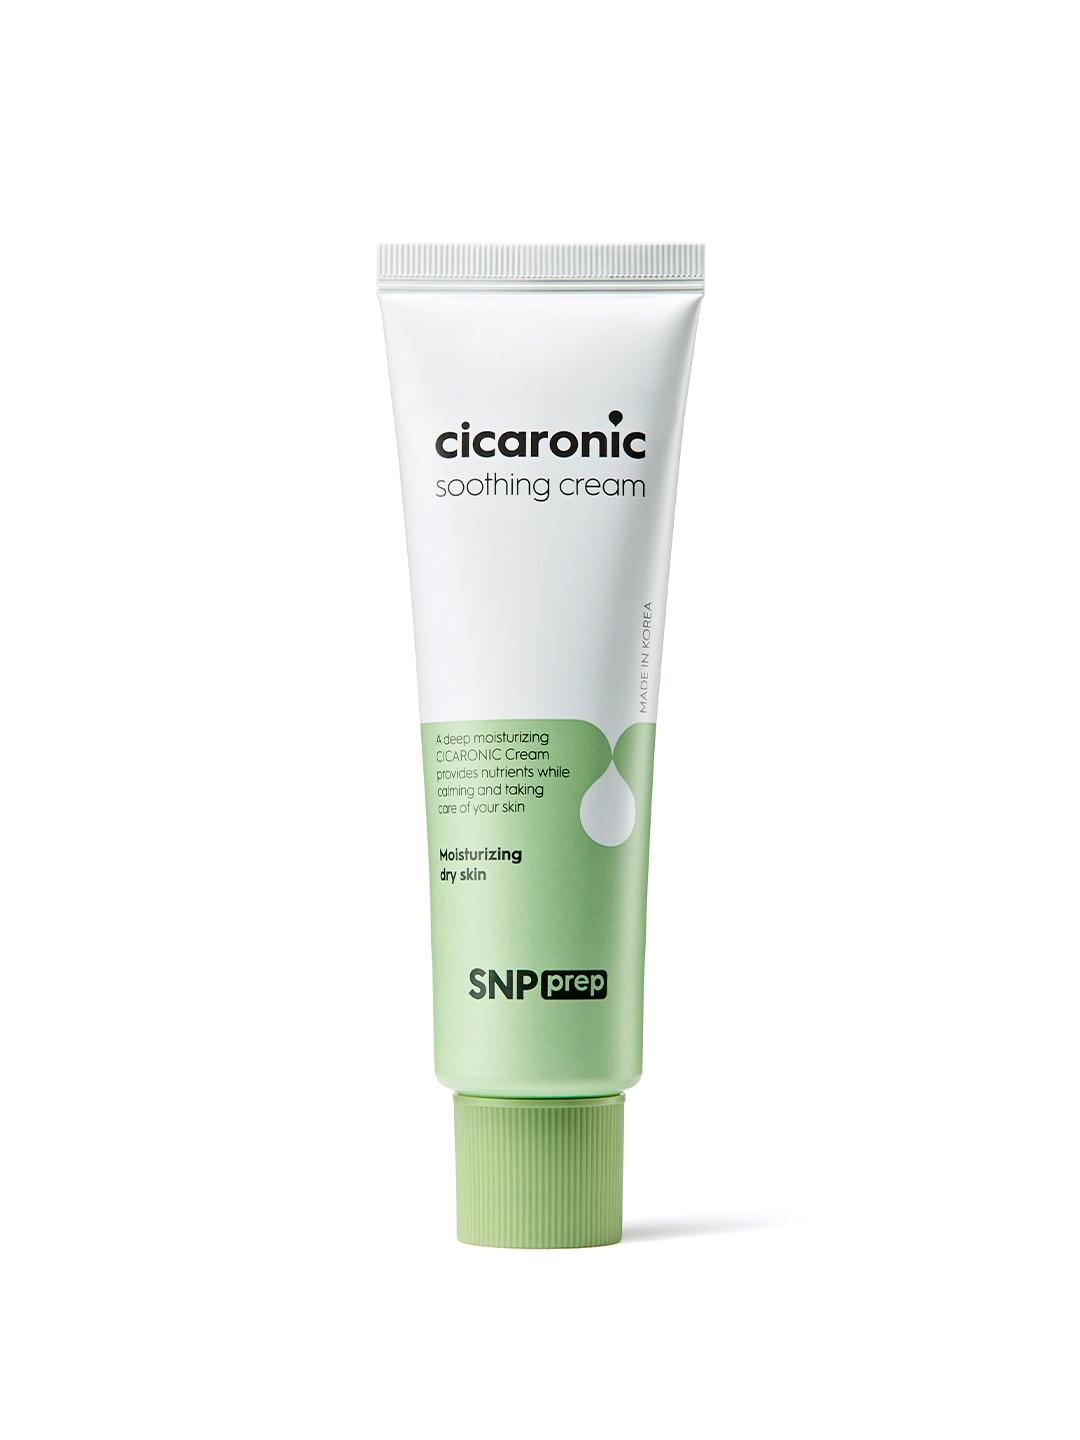 SNP Prep Cicaronic Soothing Cream with 3 types of Centella & Hyaluronic Acid - 50 ml